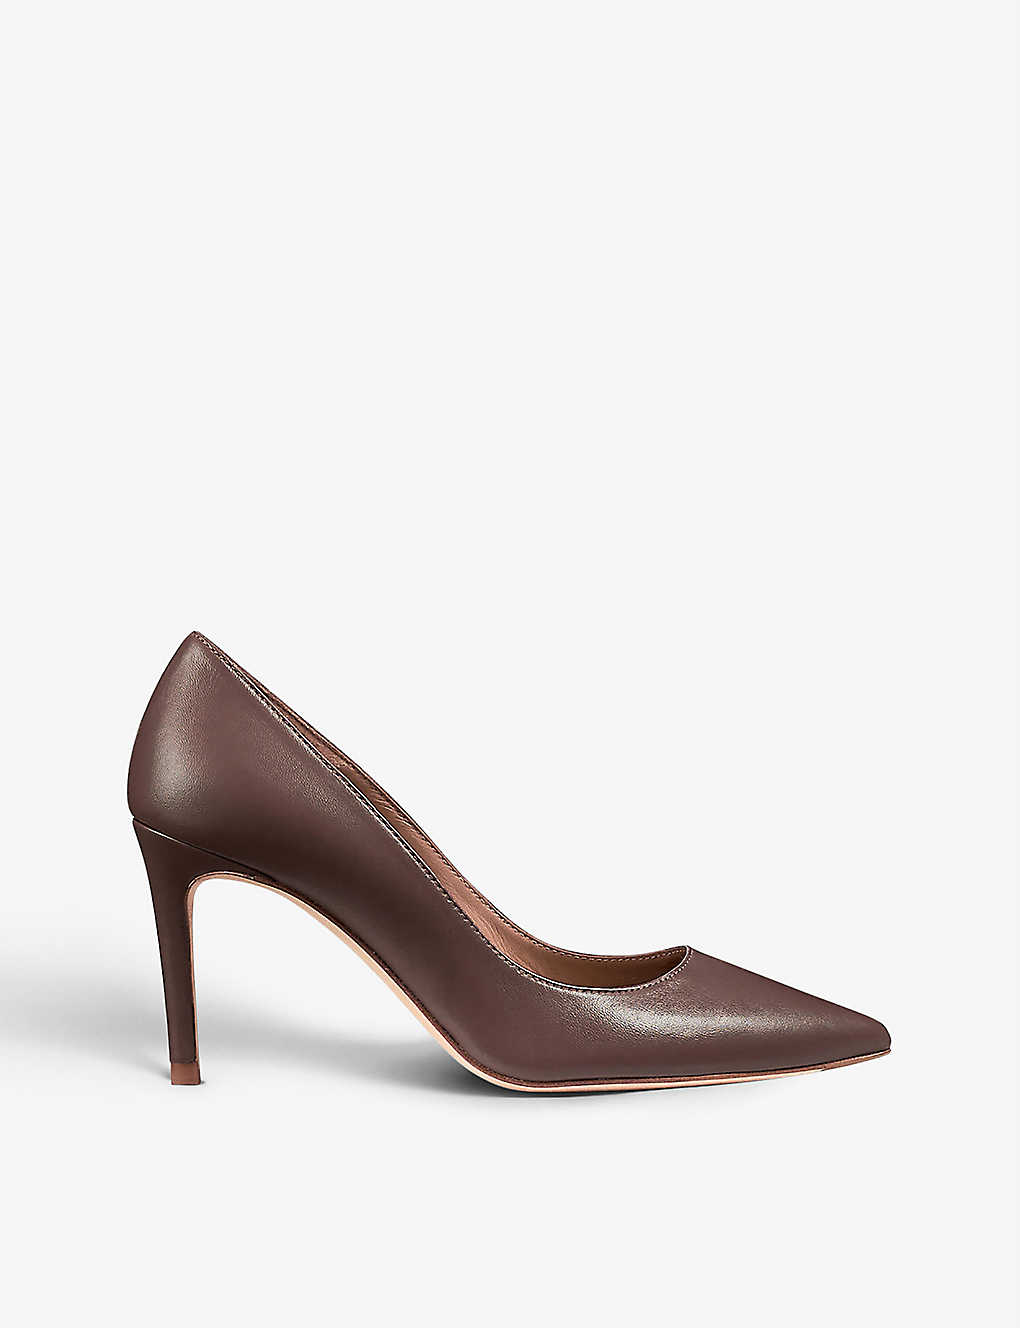 Shop Lk Bennett Women's Bro-chocolate Floret Pointed-toe Leather Courts